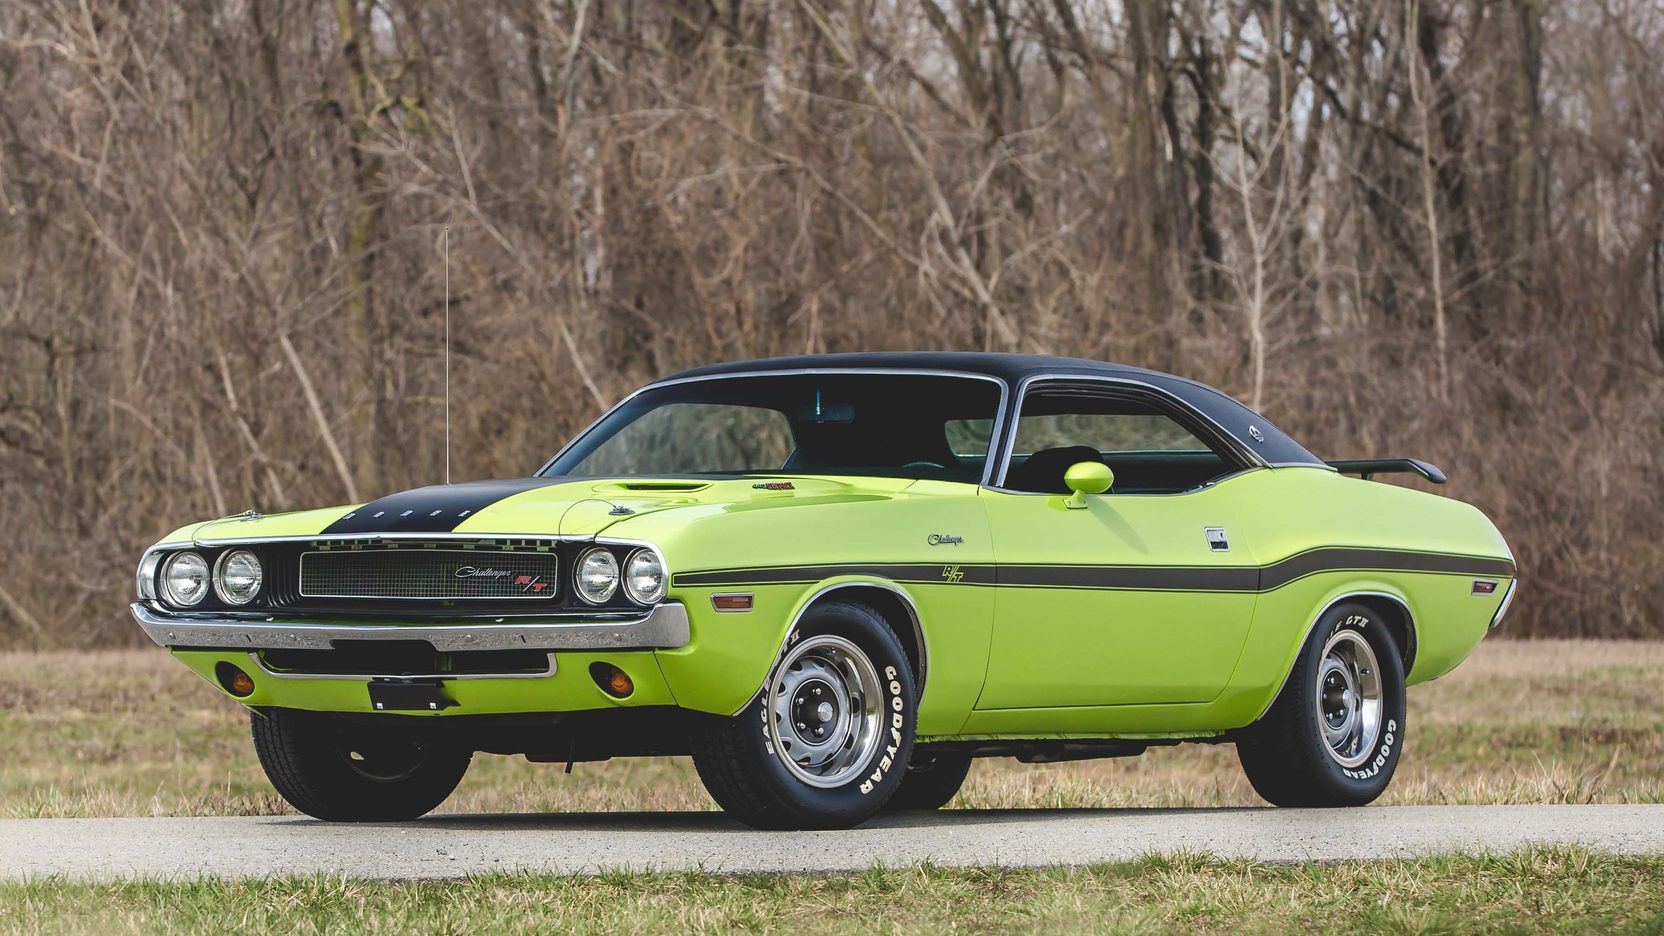 1970 Dodge Challenger R/T up for auction